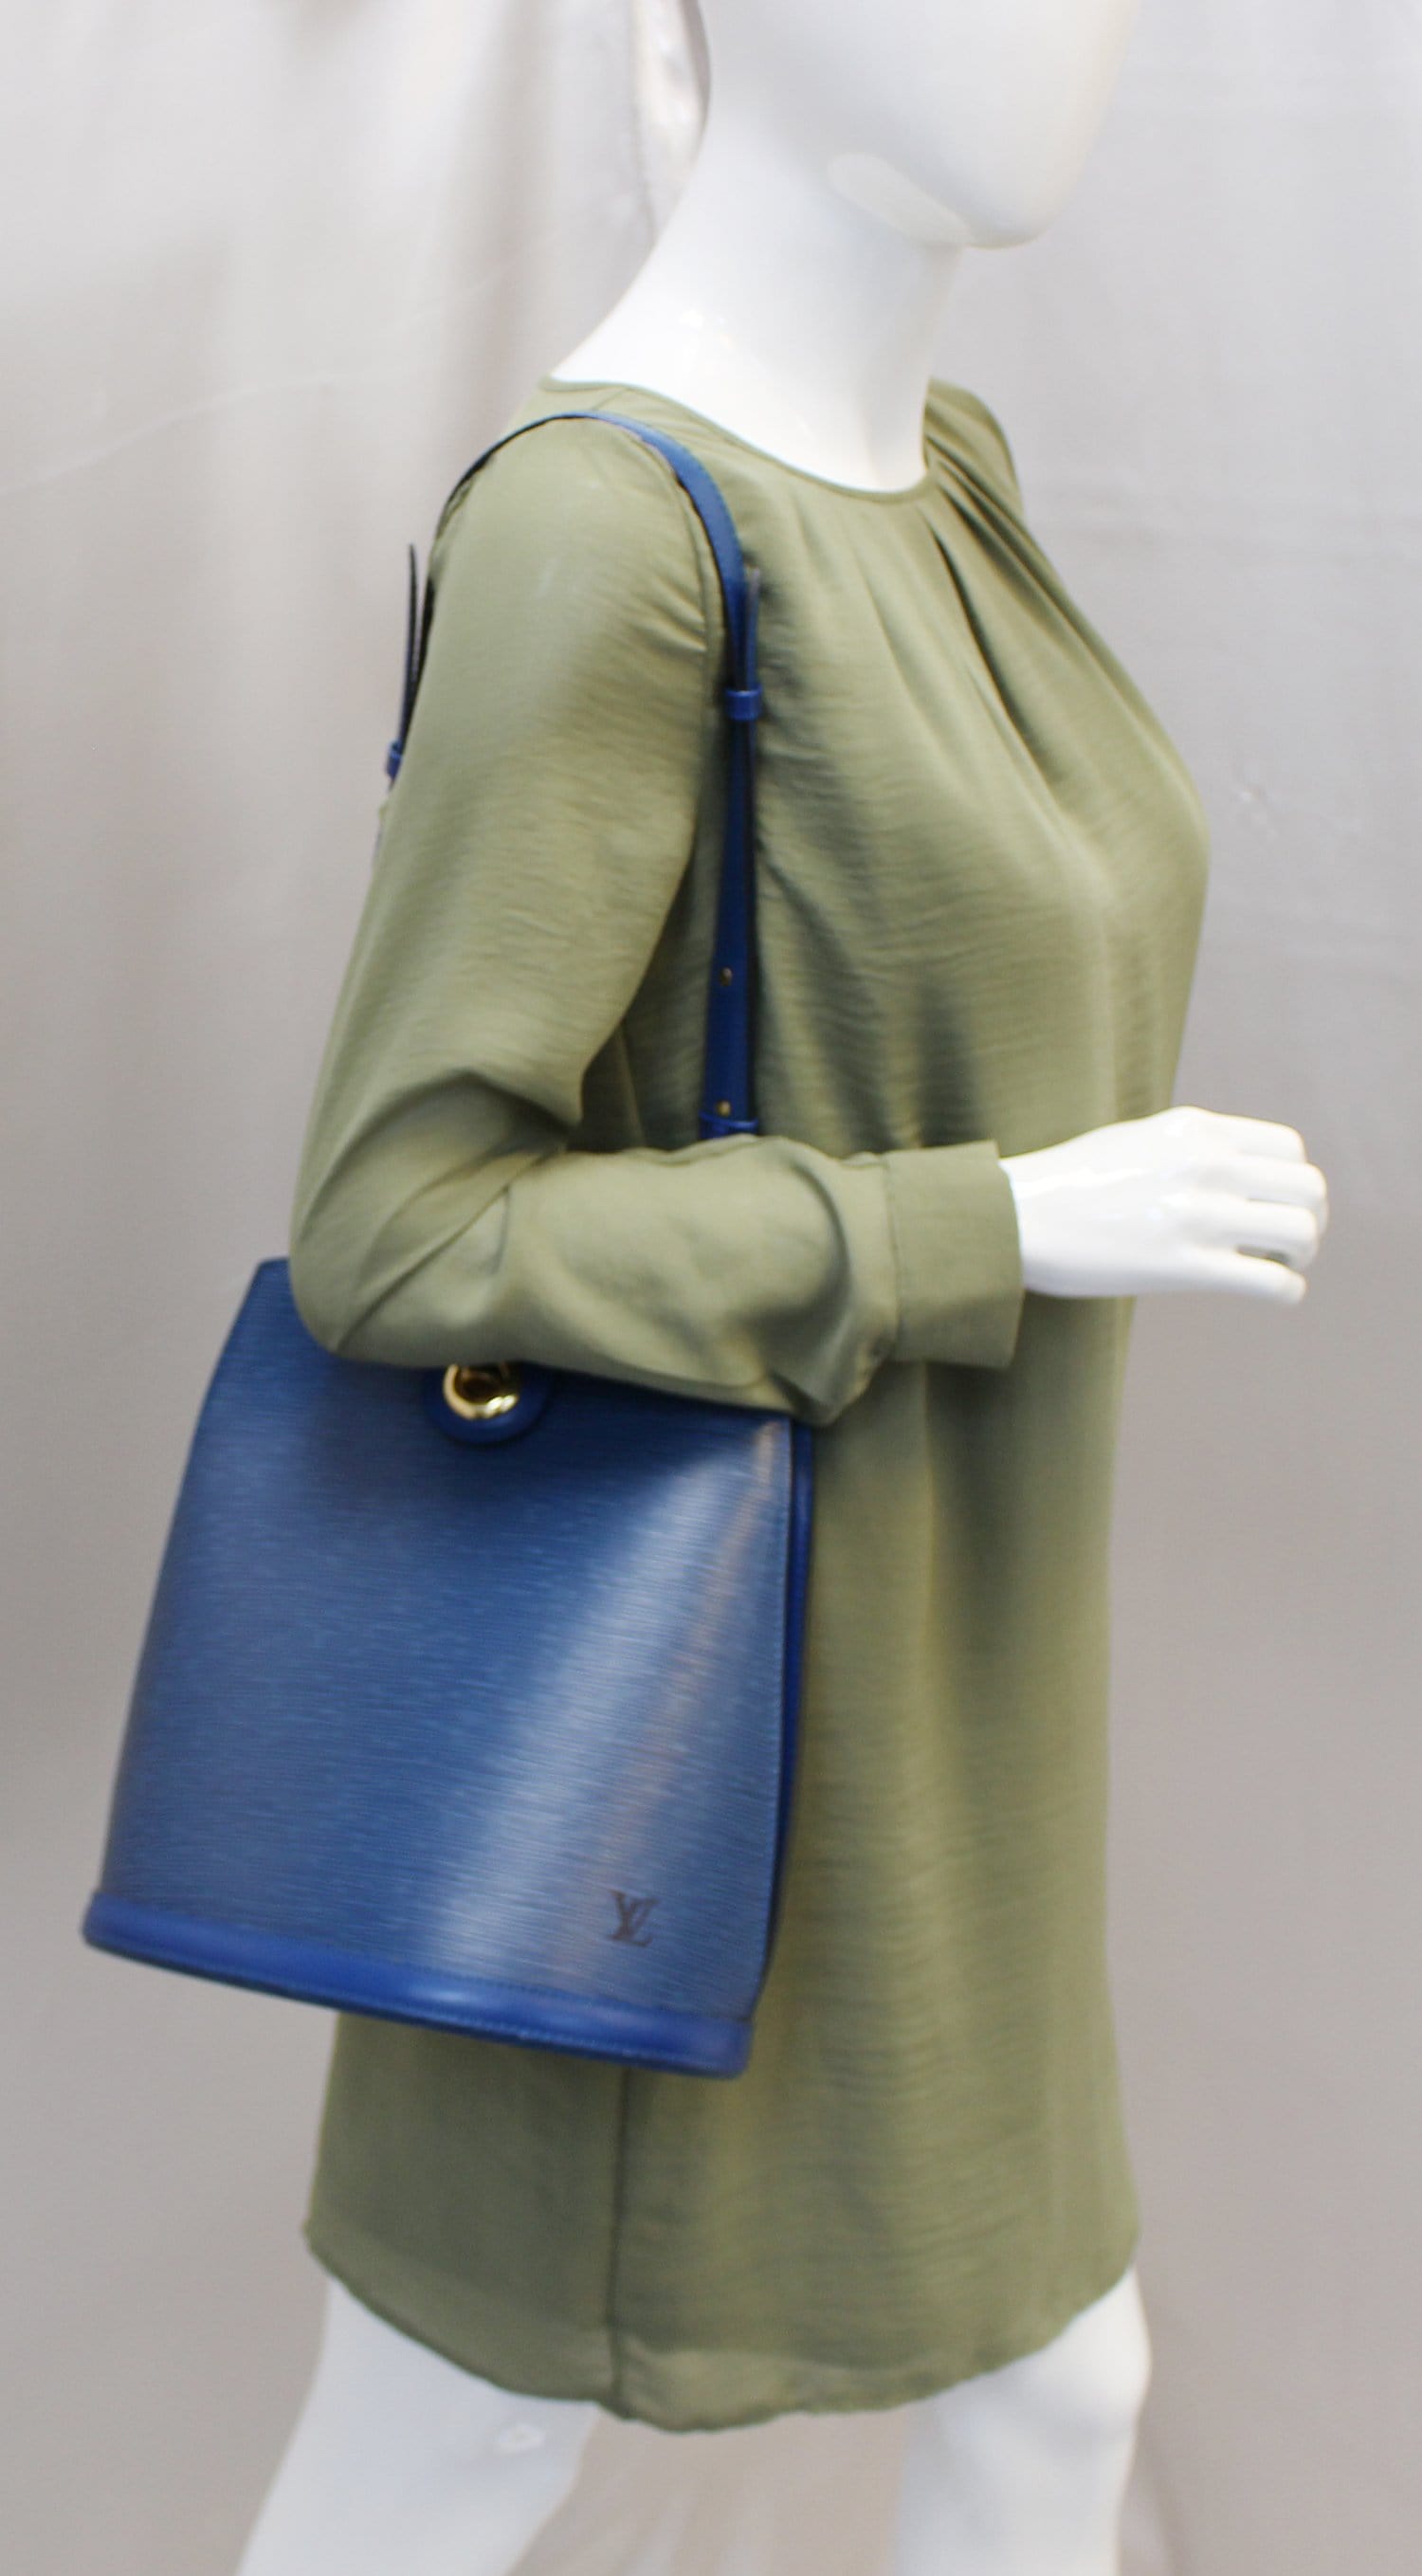 Louis Vuitton Cluny Leather Shoulder Bag (pre-owned) in Blue